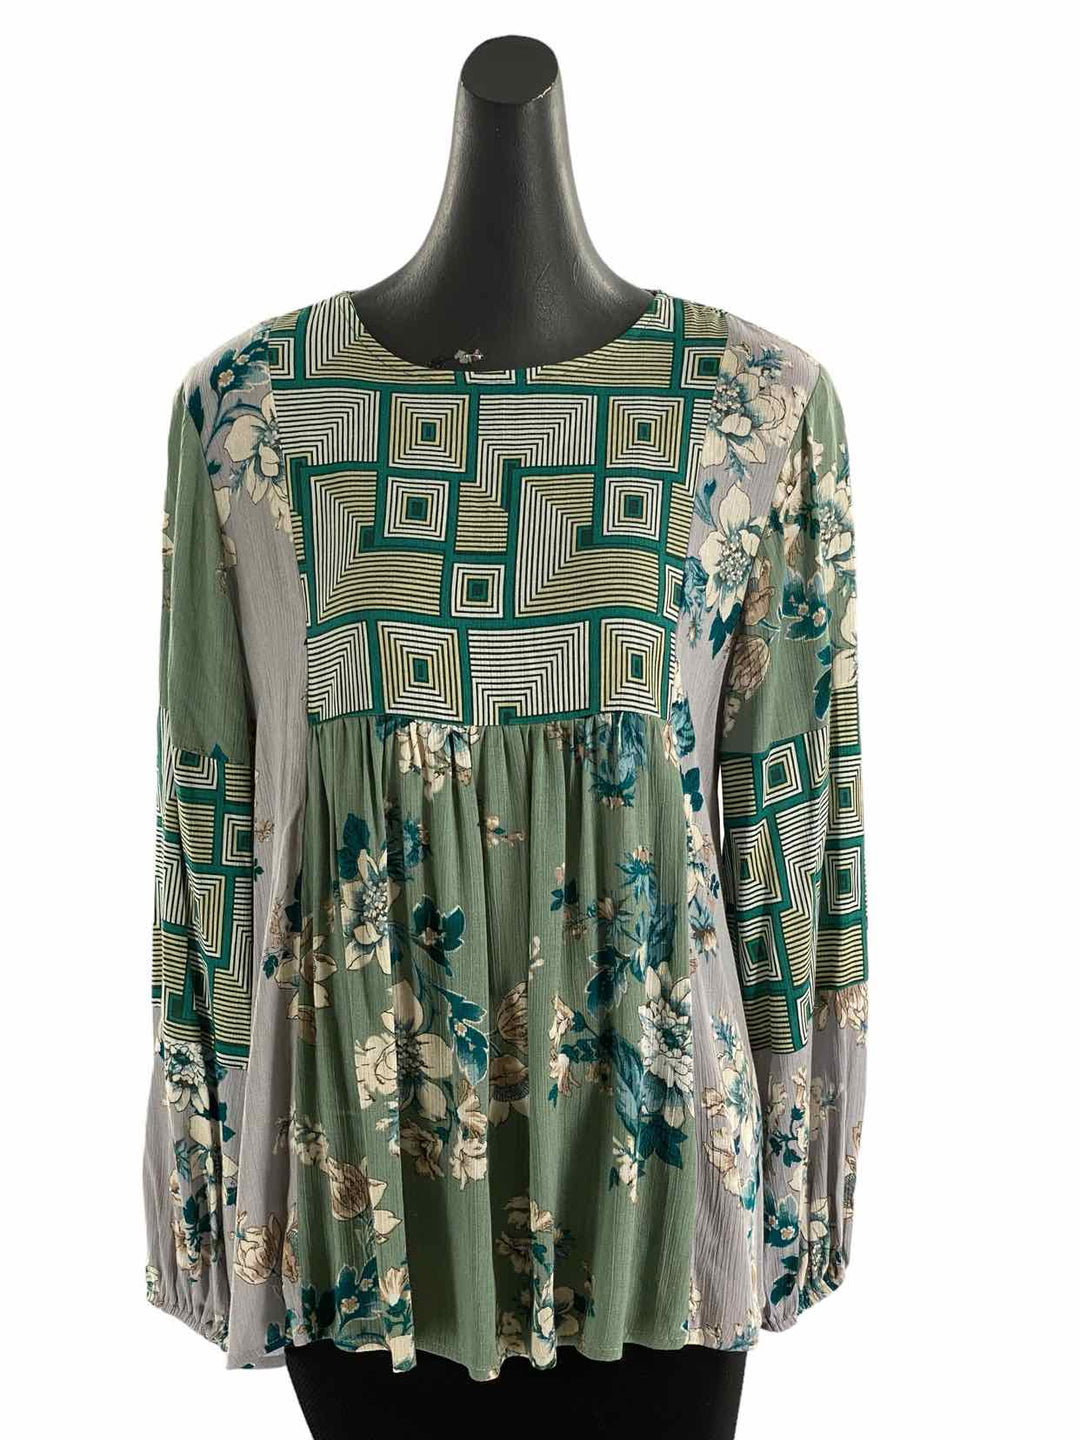 Ces Femme Size M Green Gray Long Sleeve Shirts